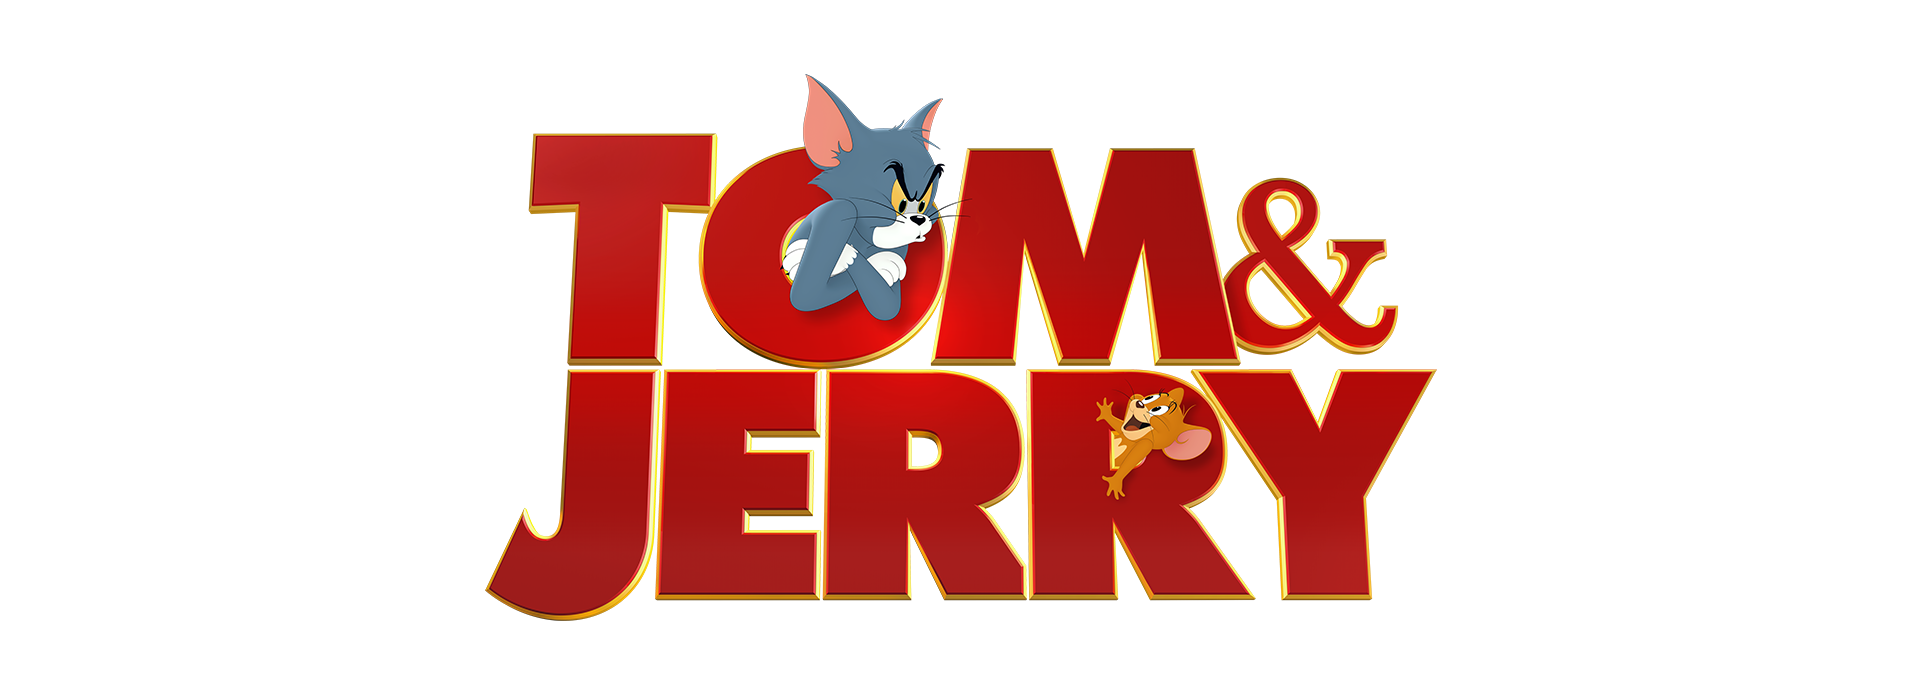 Tom and Jerry | Games, Videos & Downloads | Cartoon Network